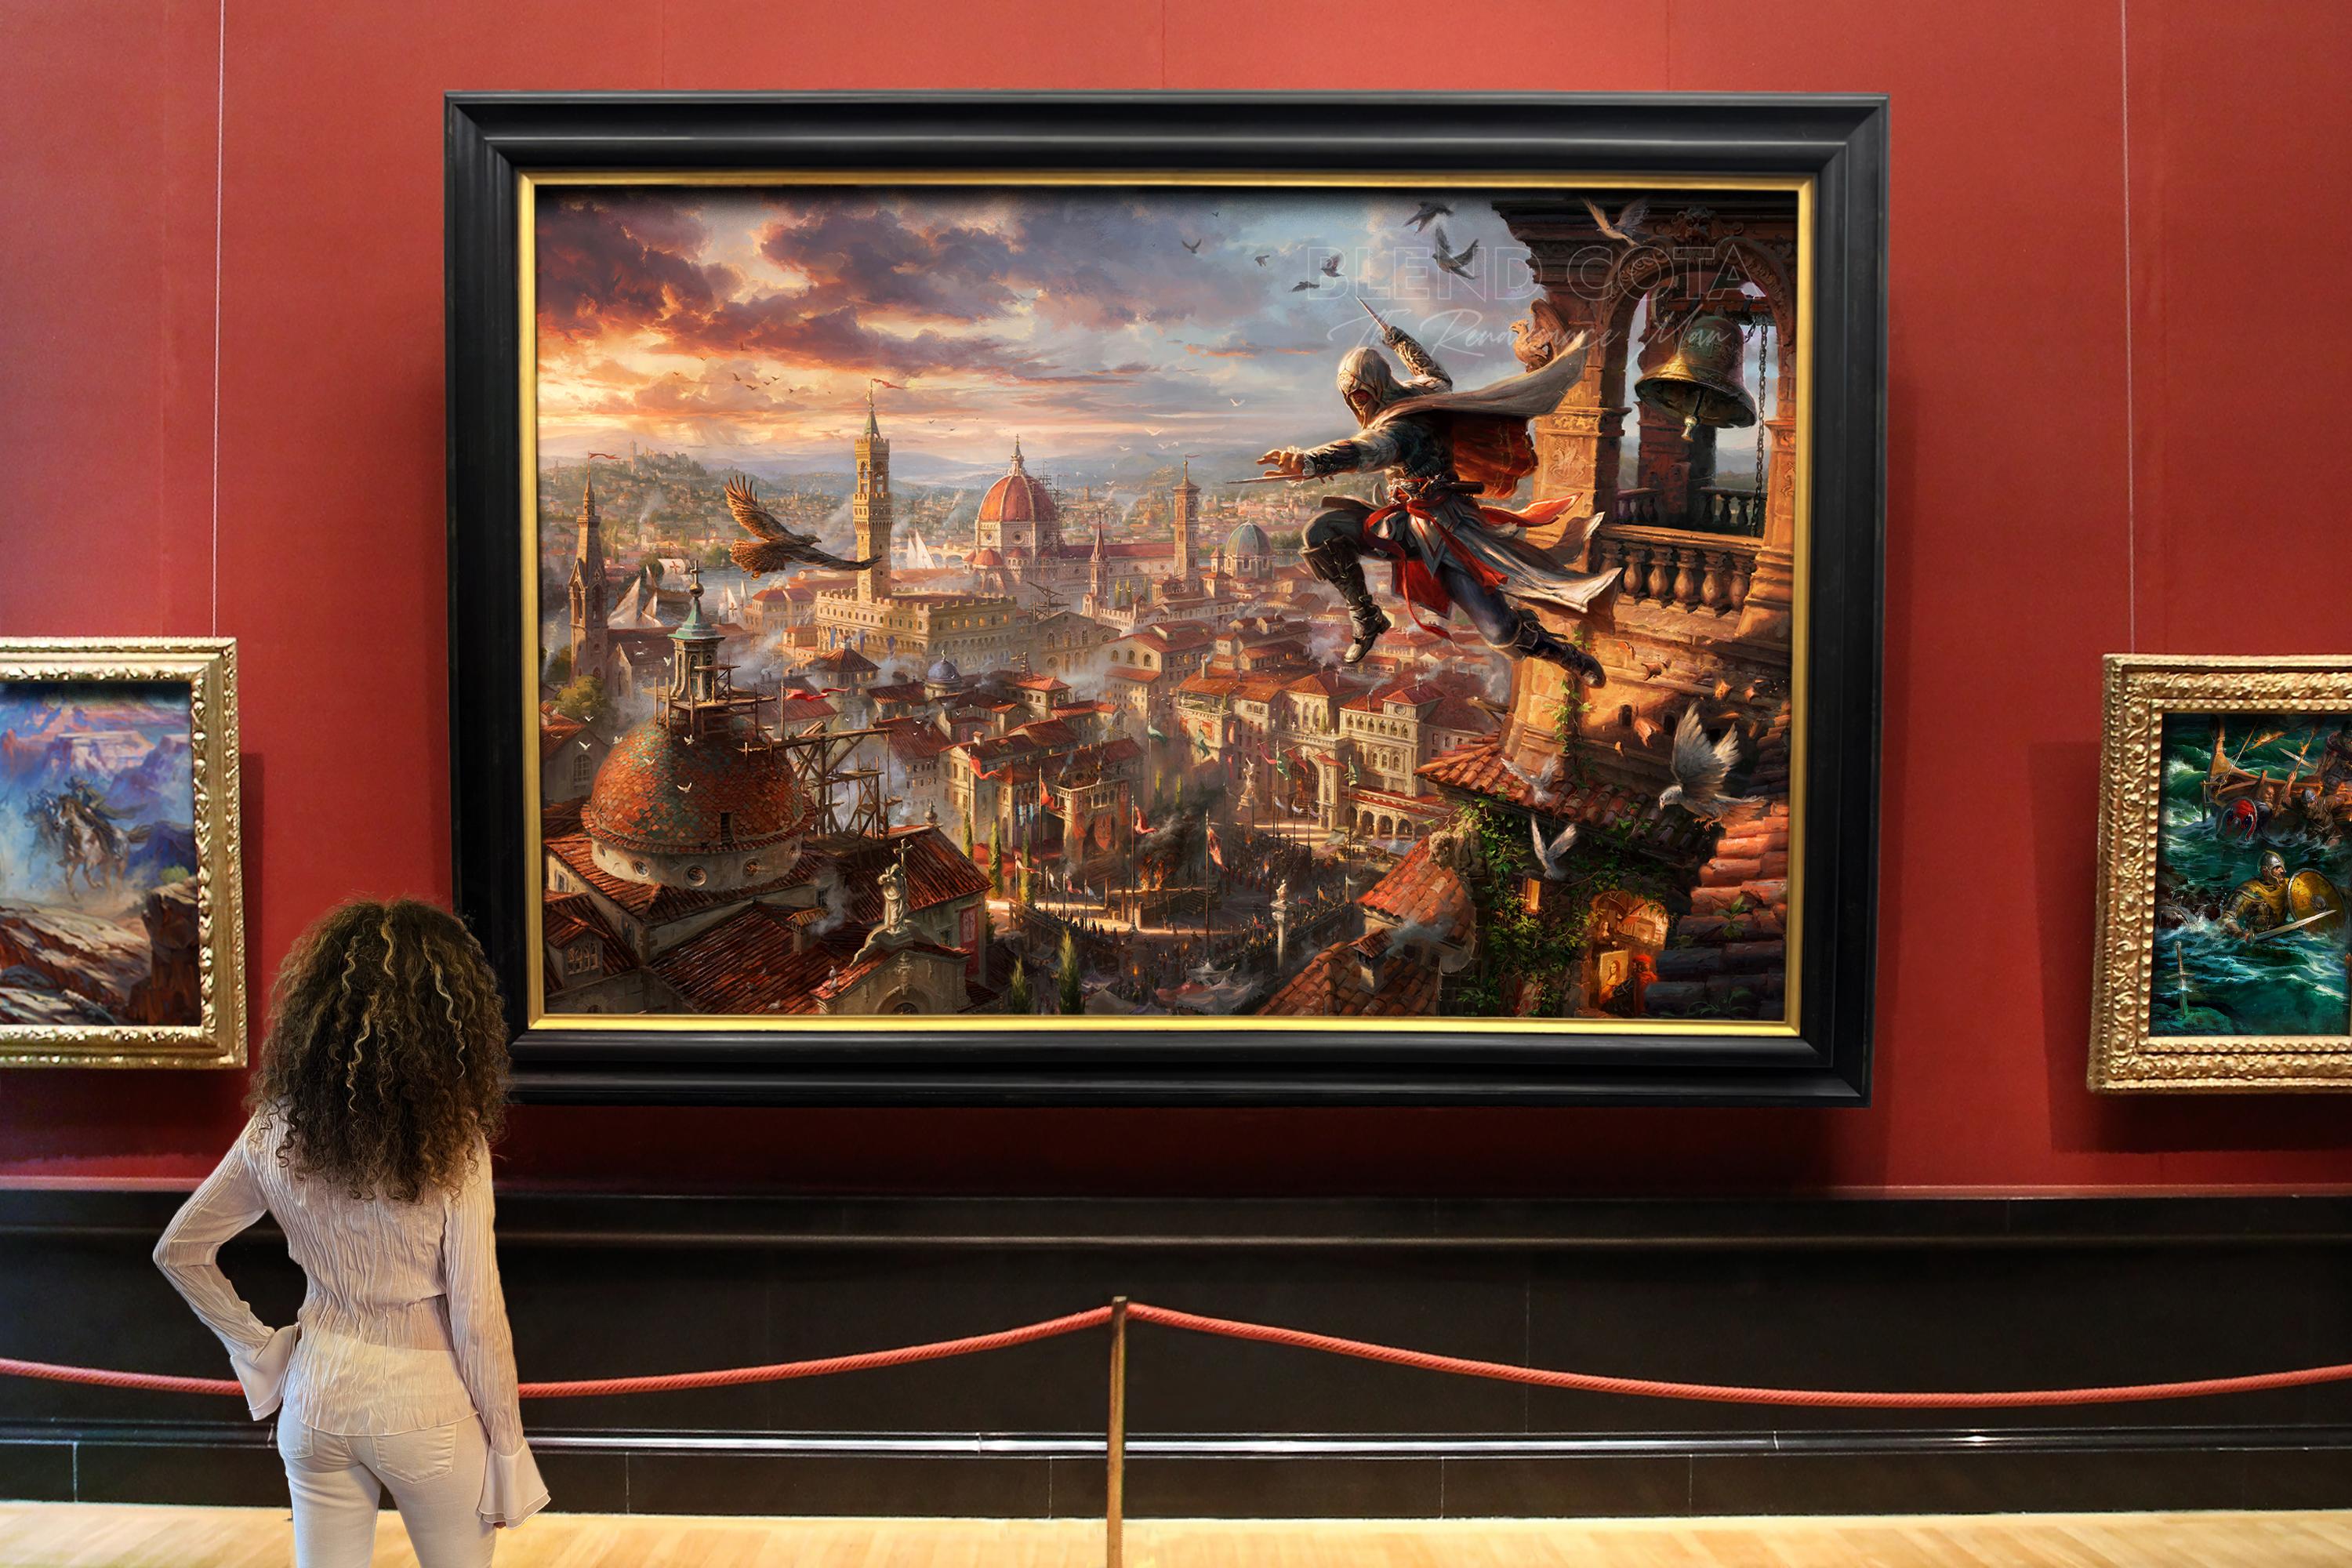 Assassin’s Creed® Florence reflects the rise of the Renaissance period in Florence and Ezio Auditore’s acceptance of his lineage into the Order of Assassins. With its incredible details, this masterpiece by Blend Cota brings to life the panoramic